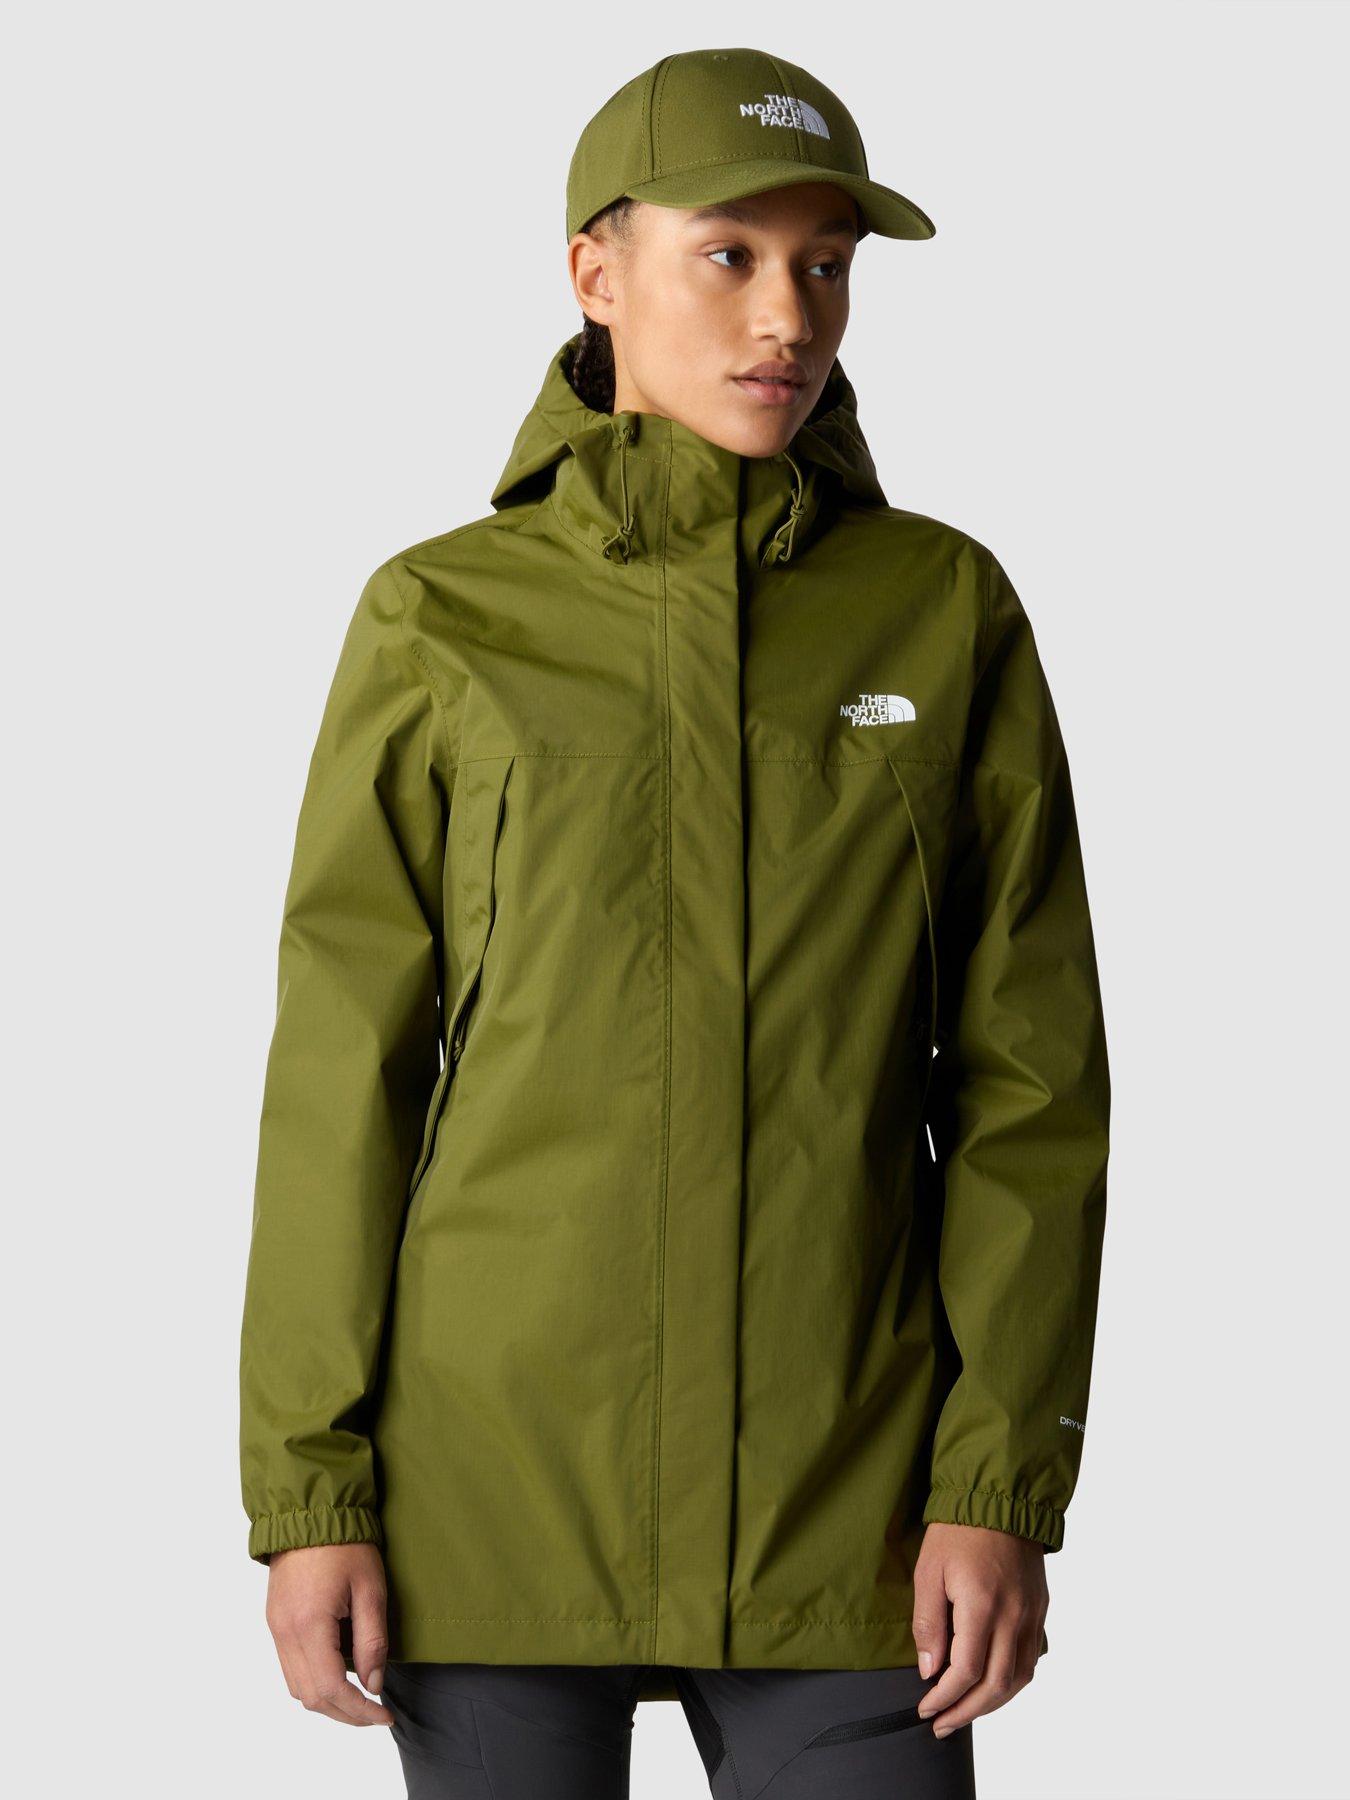 THE NORTH FACE Womens Antora Parka - Olive, Dark Olive, Size Xs, Women